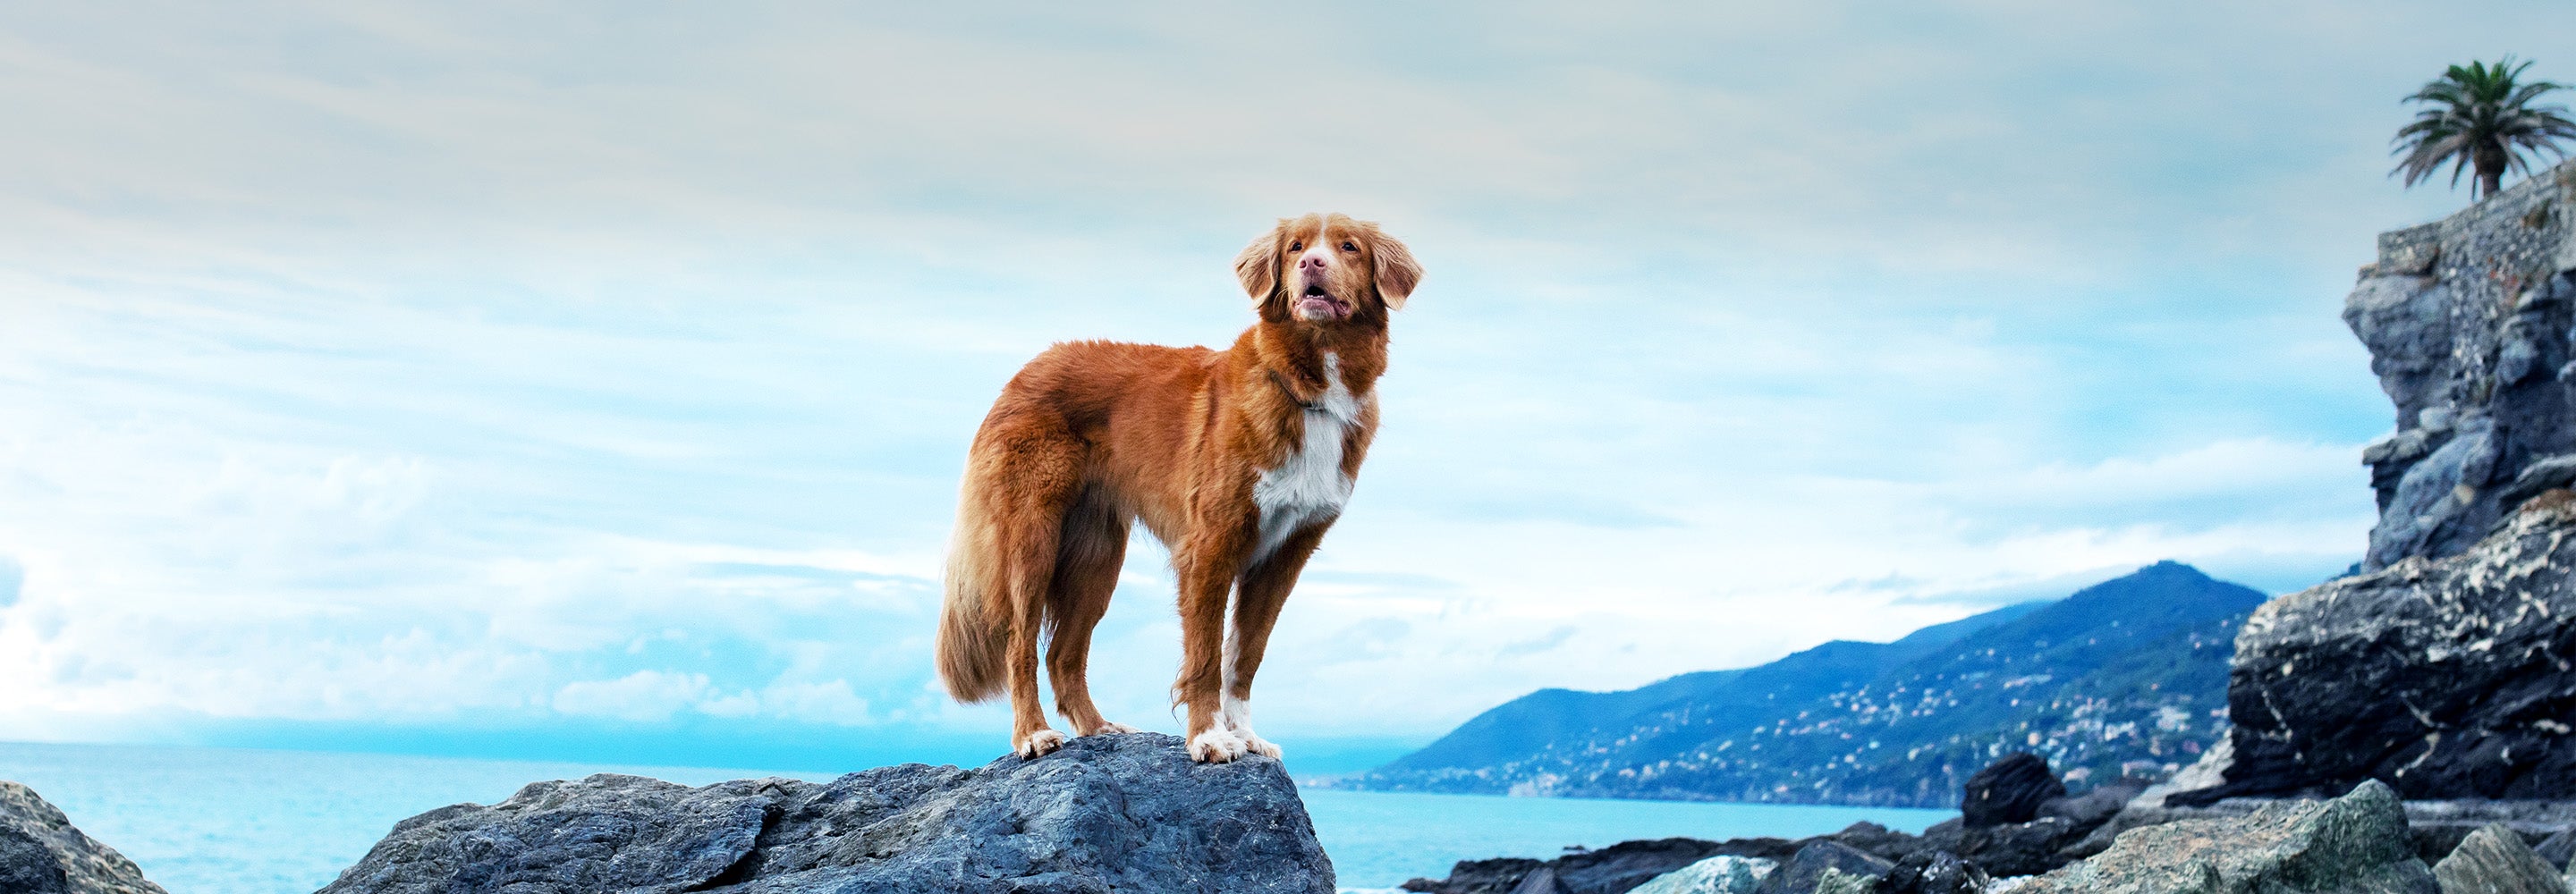 A brown dog standing on rocky terrain with a seascape, hills, and a palm tree in the background.